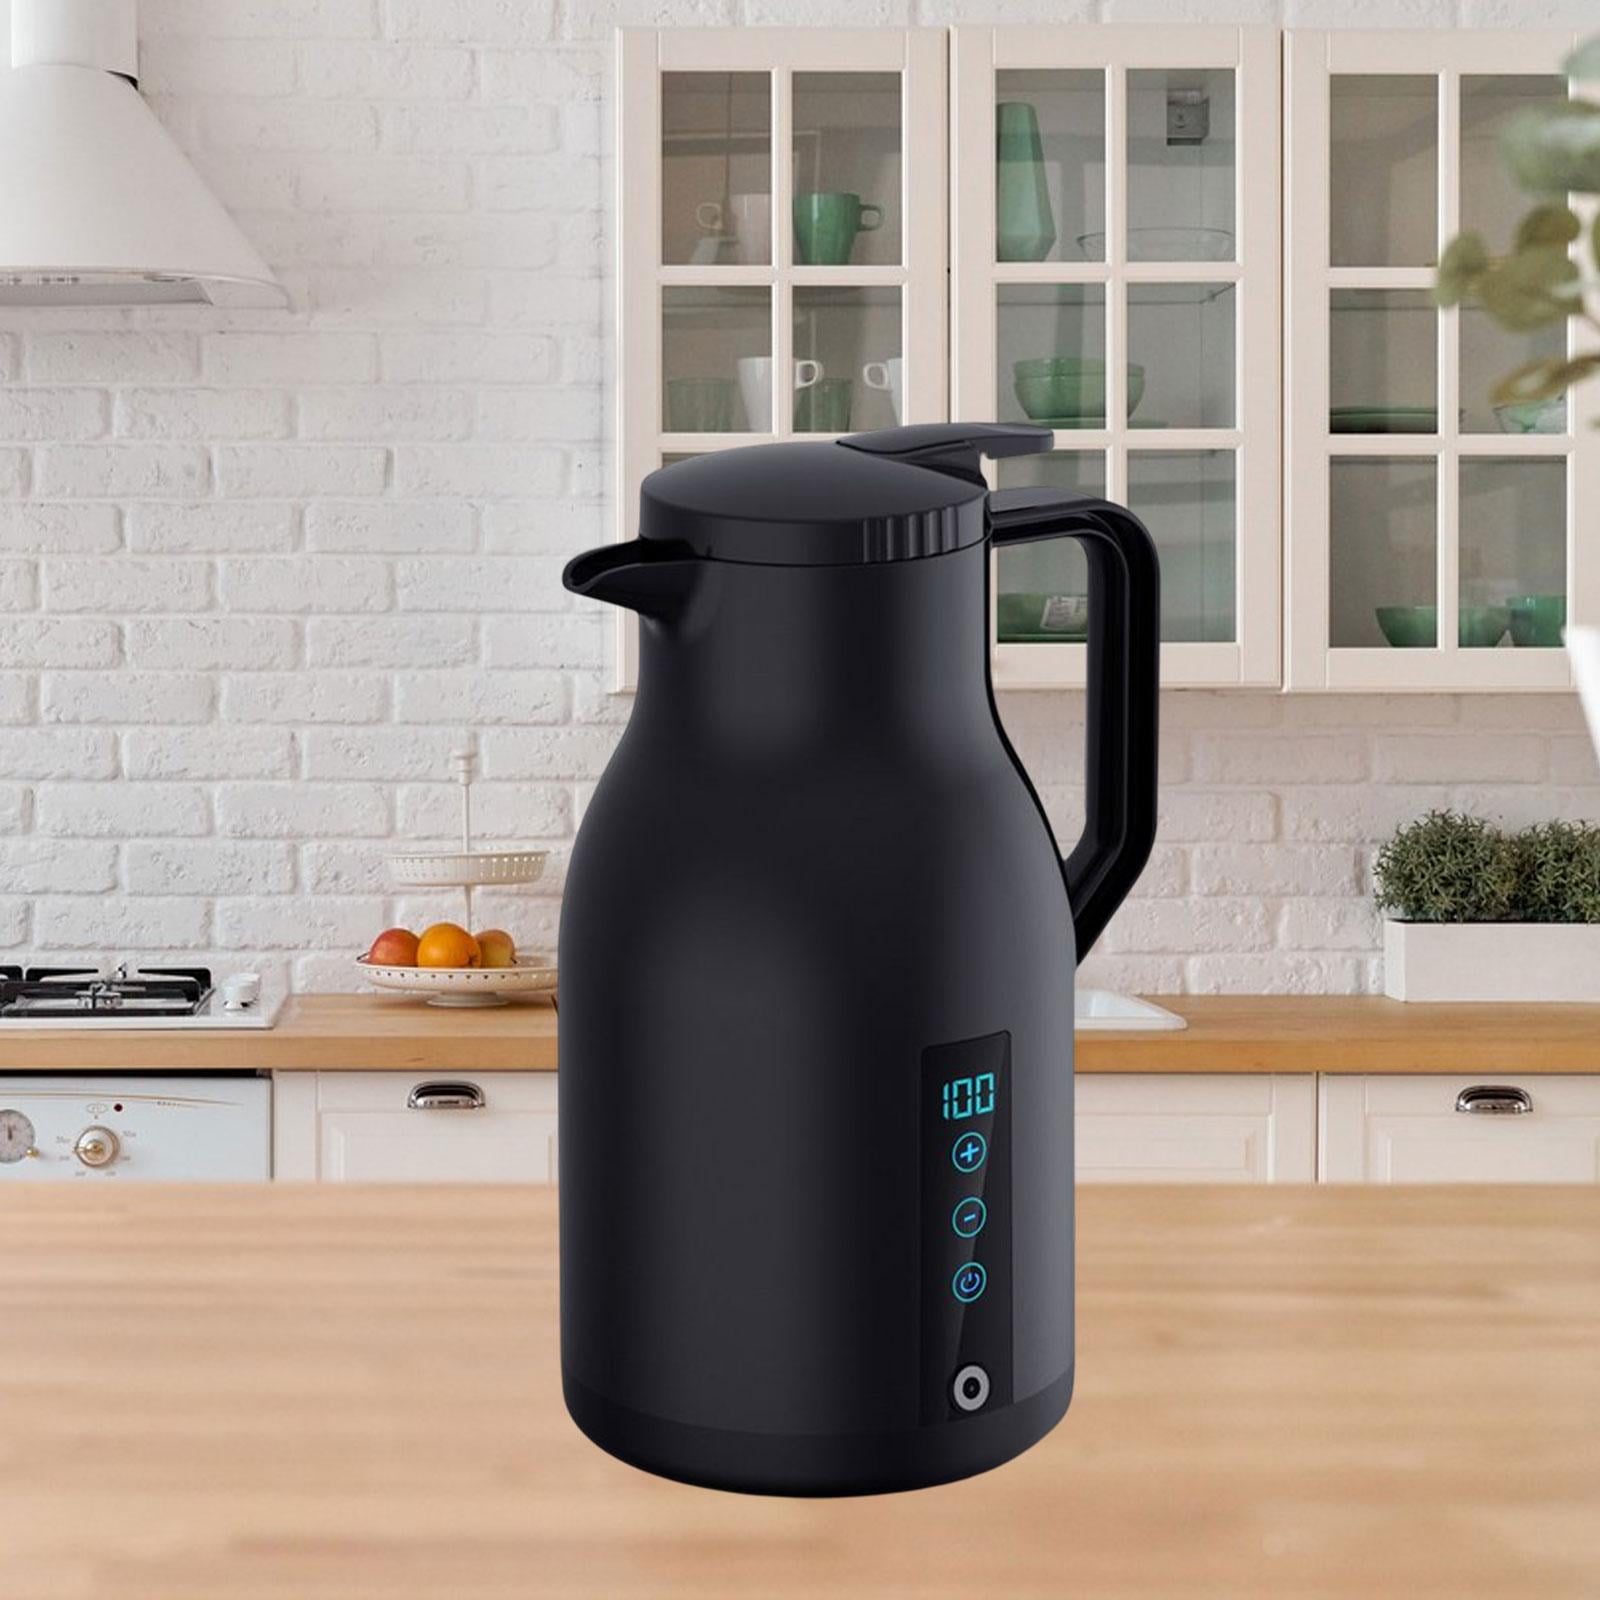 Wireless kettle portable electric kettle car boiling water USB charging  bank outdoor travel heating thermos cup - AliExpress